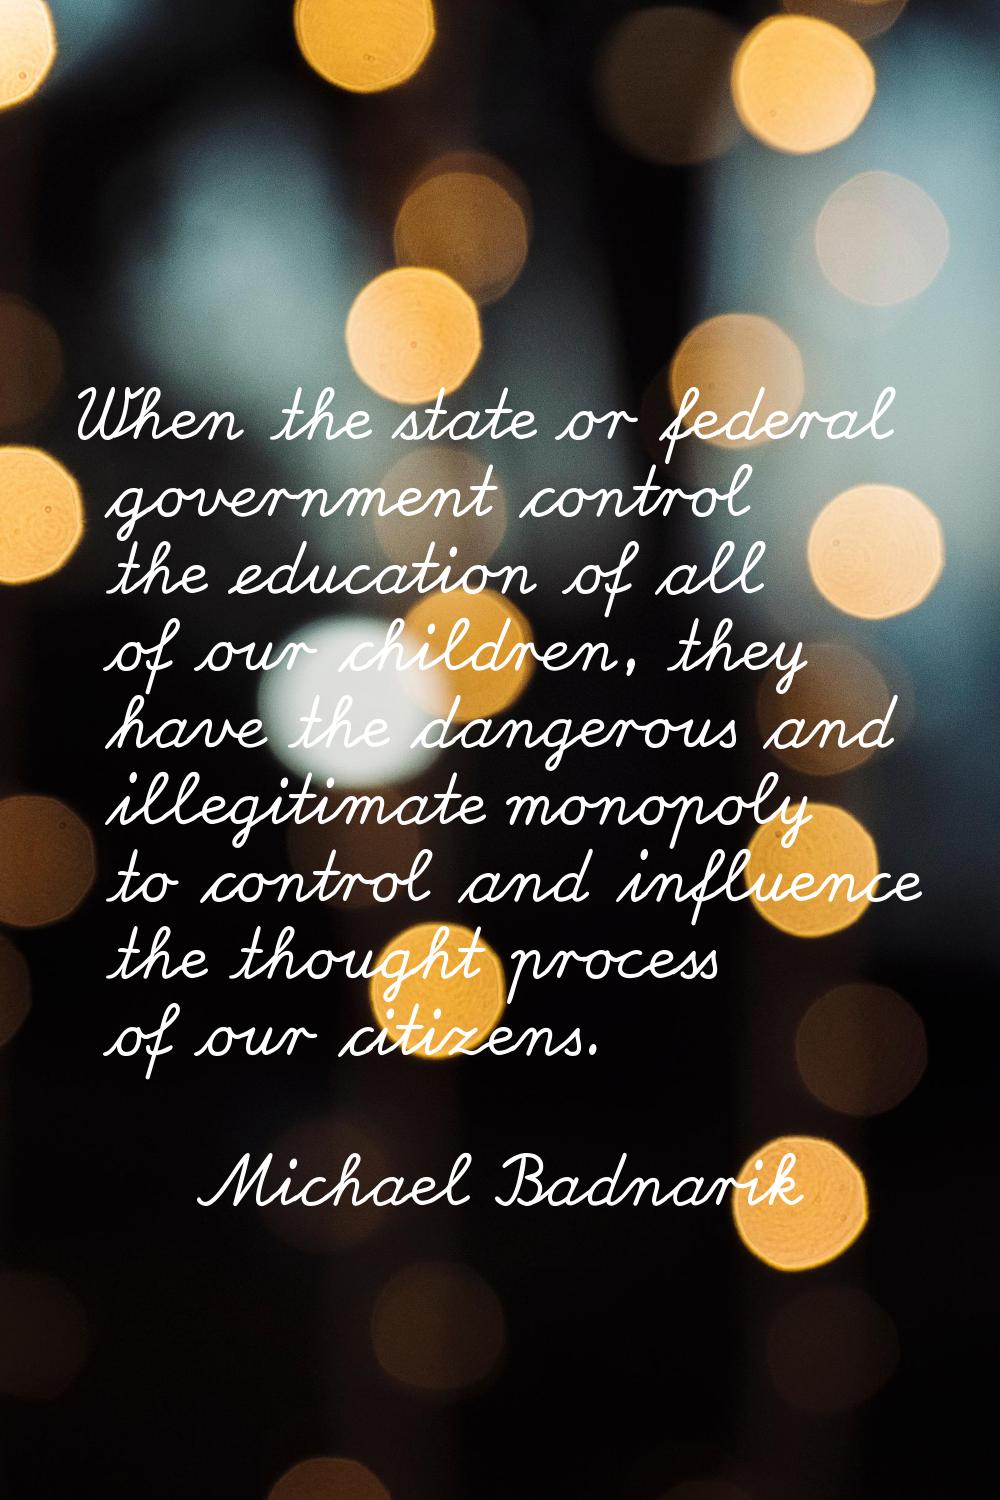 When the state or federal government control the education of all of our children, they have the da